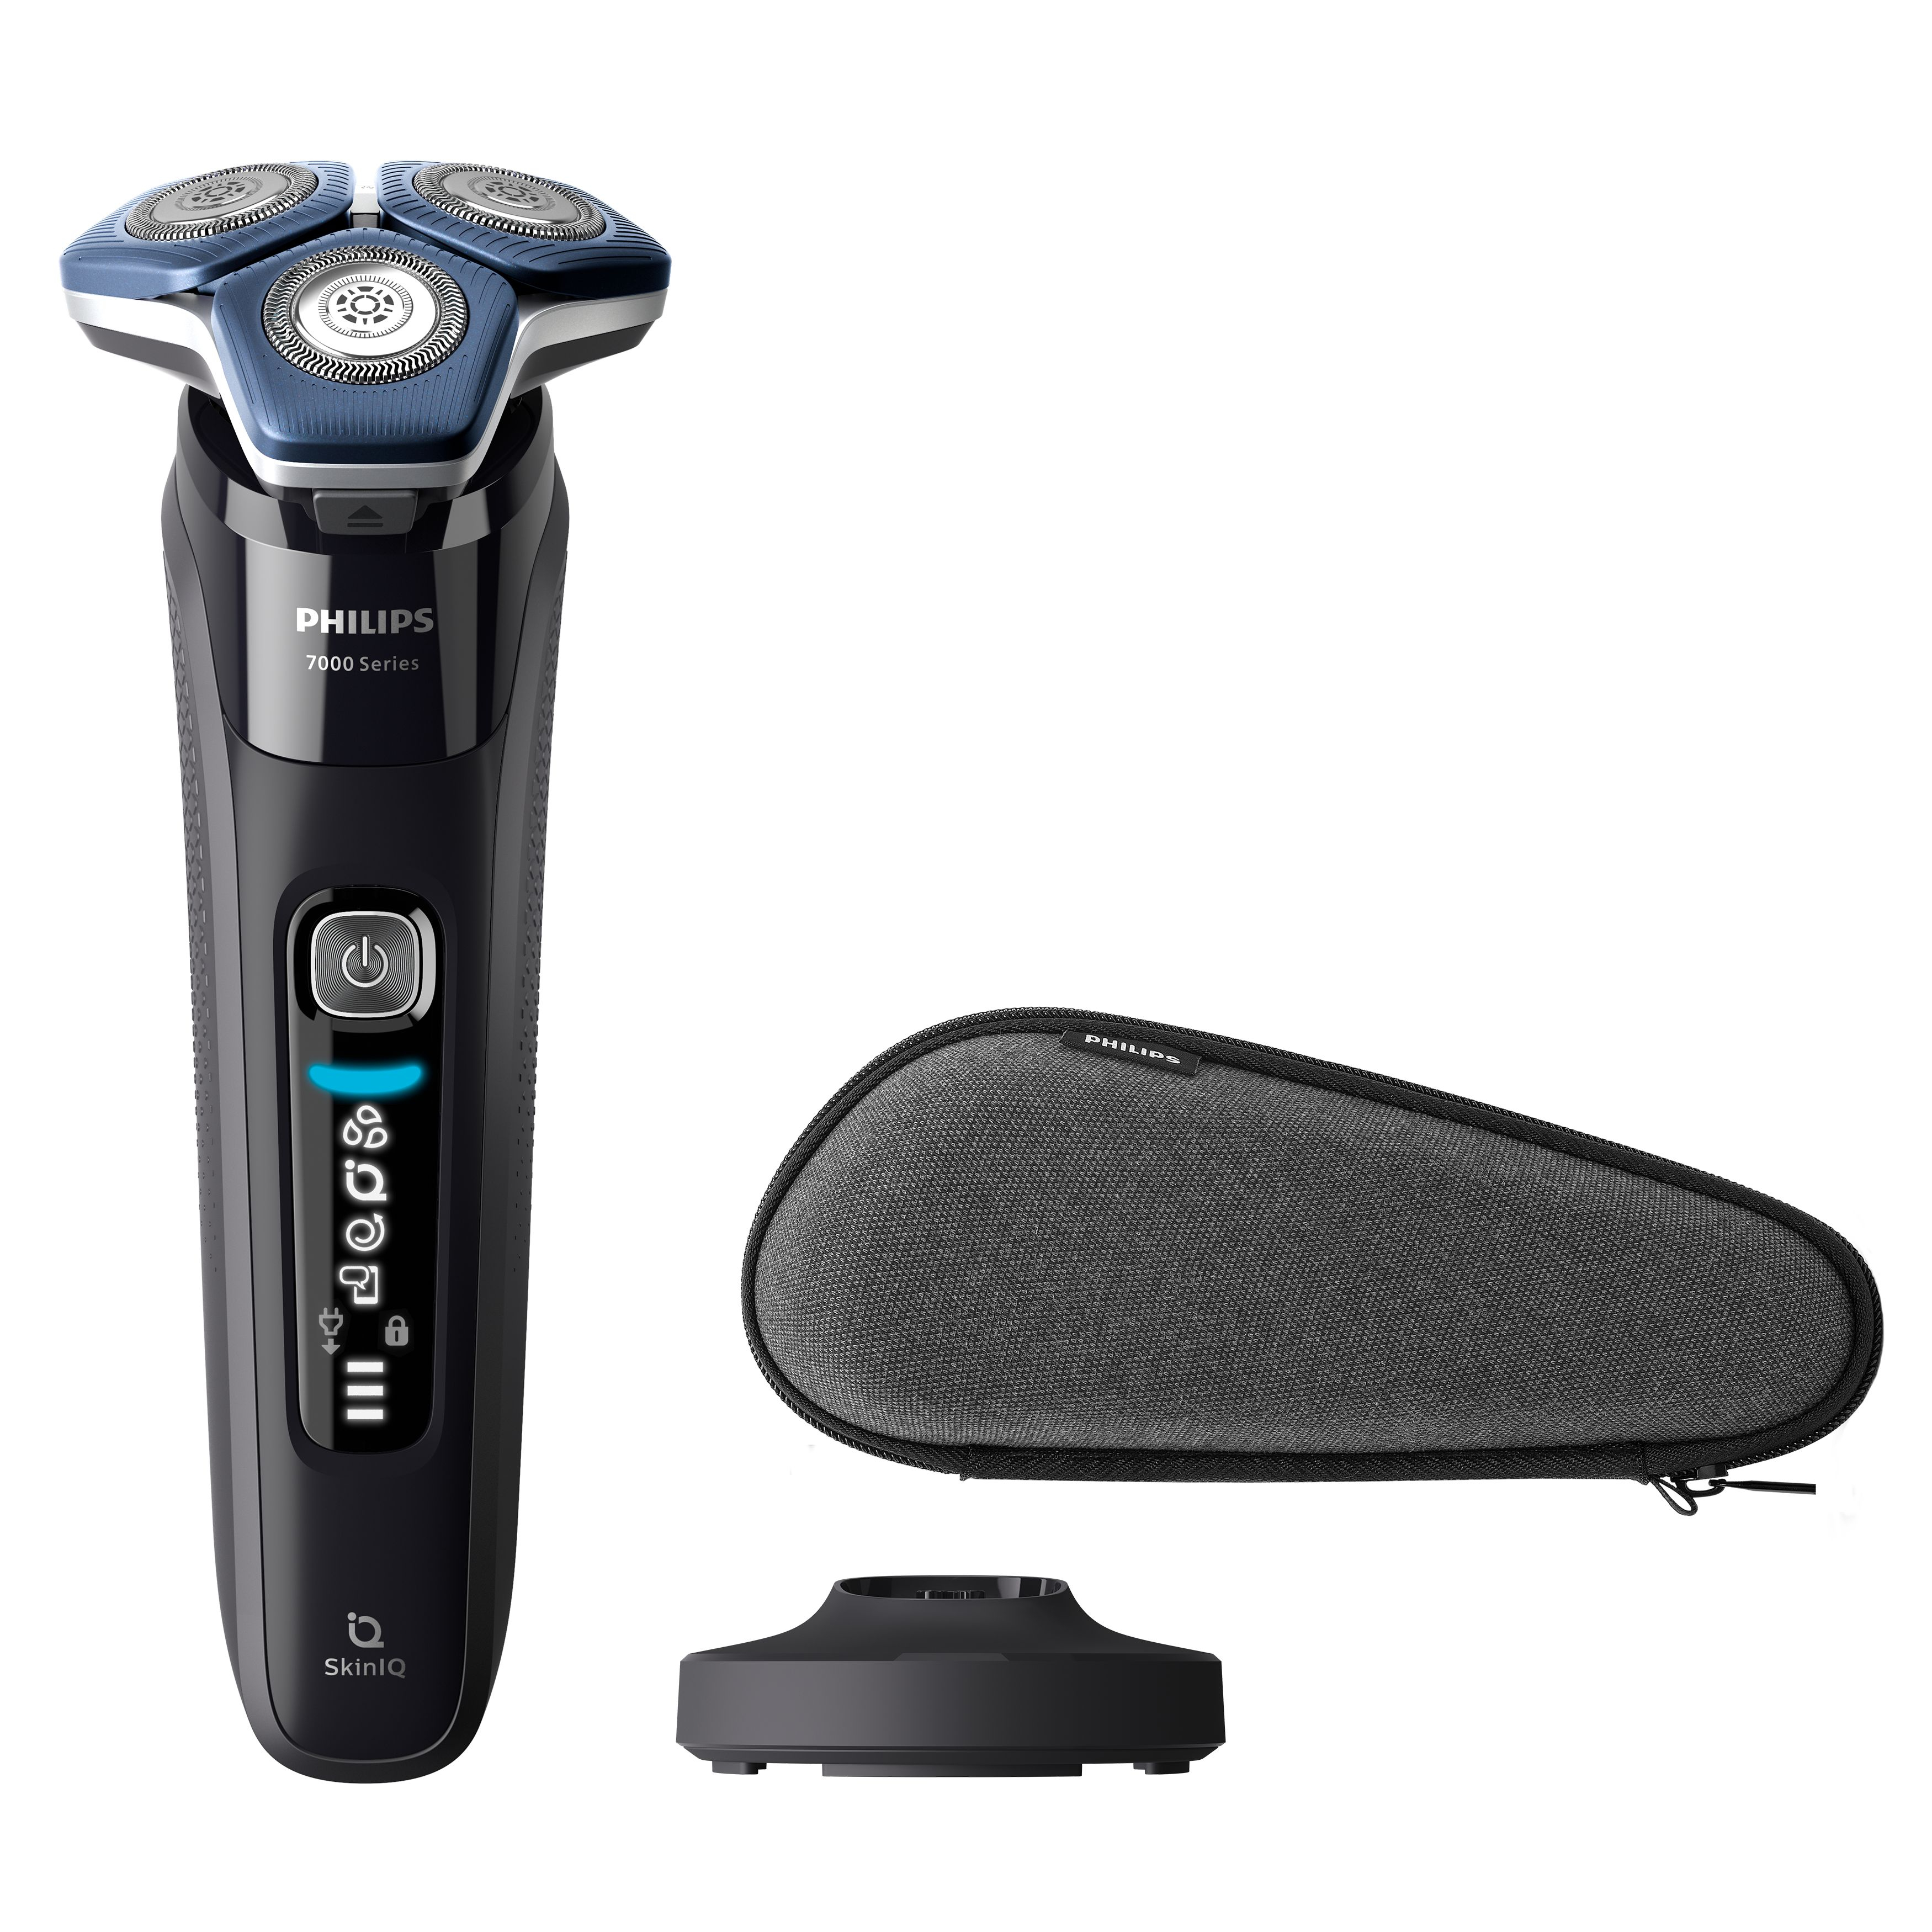 Philips Series 7000 Wet and Dry electric shaver